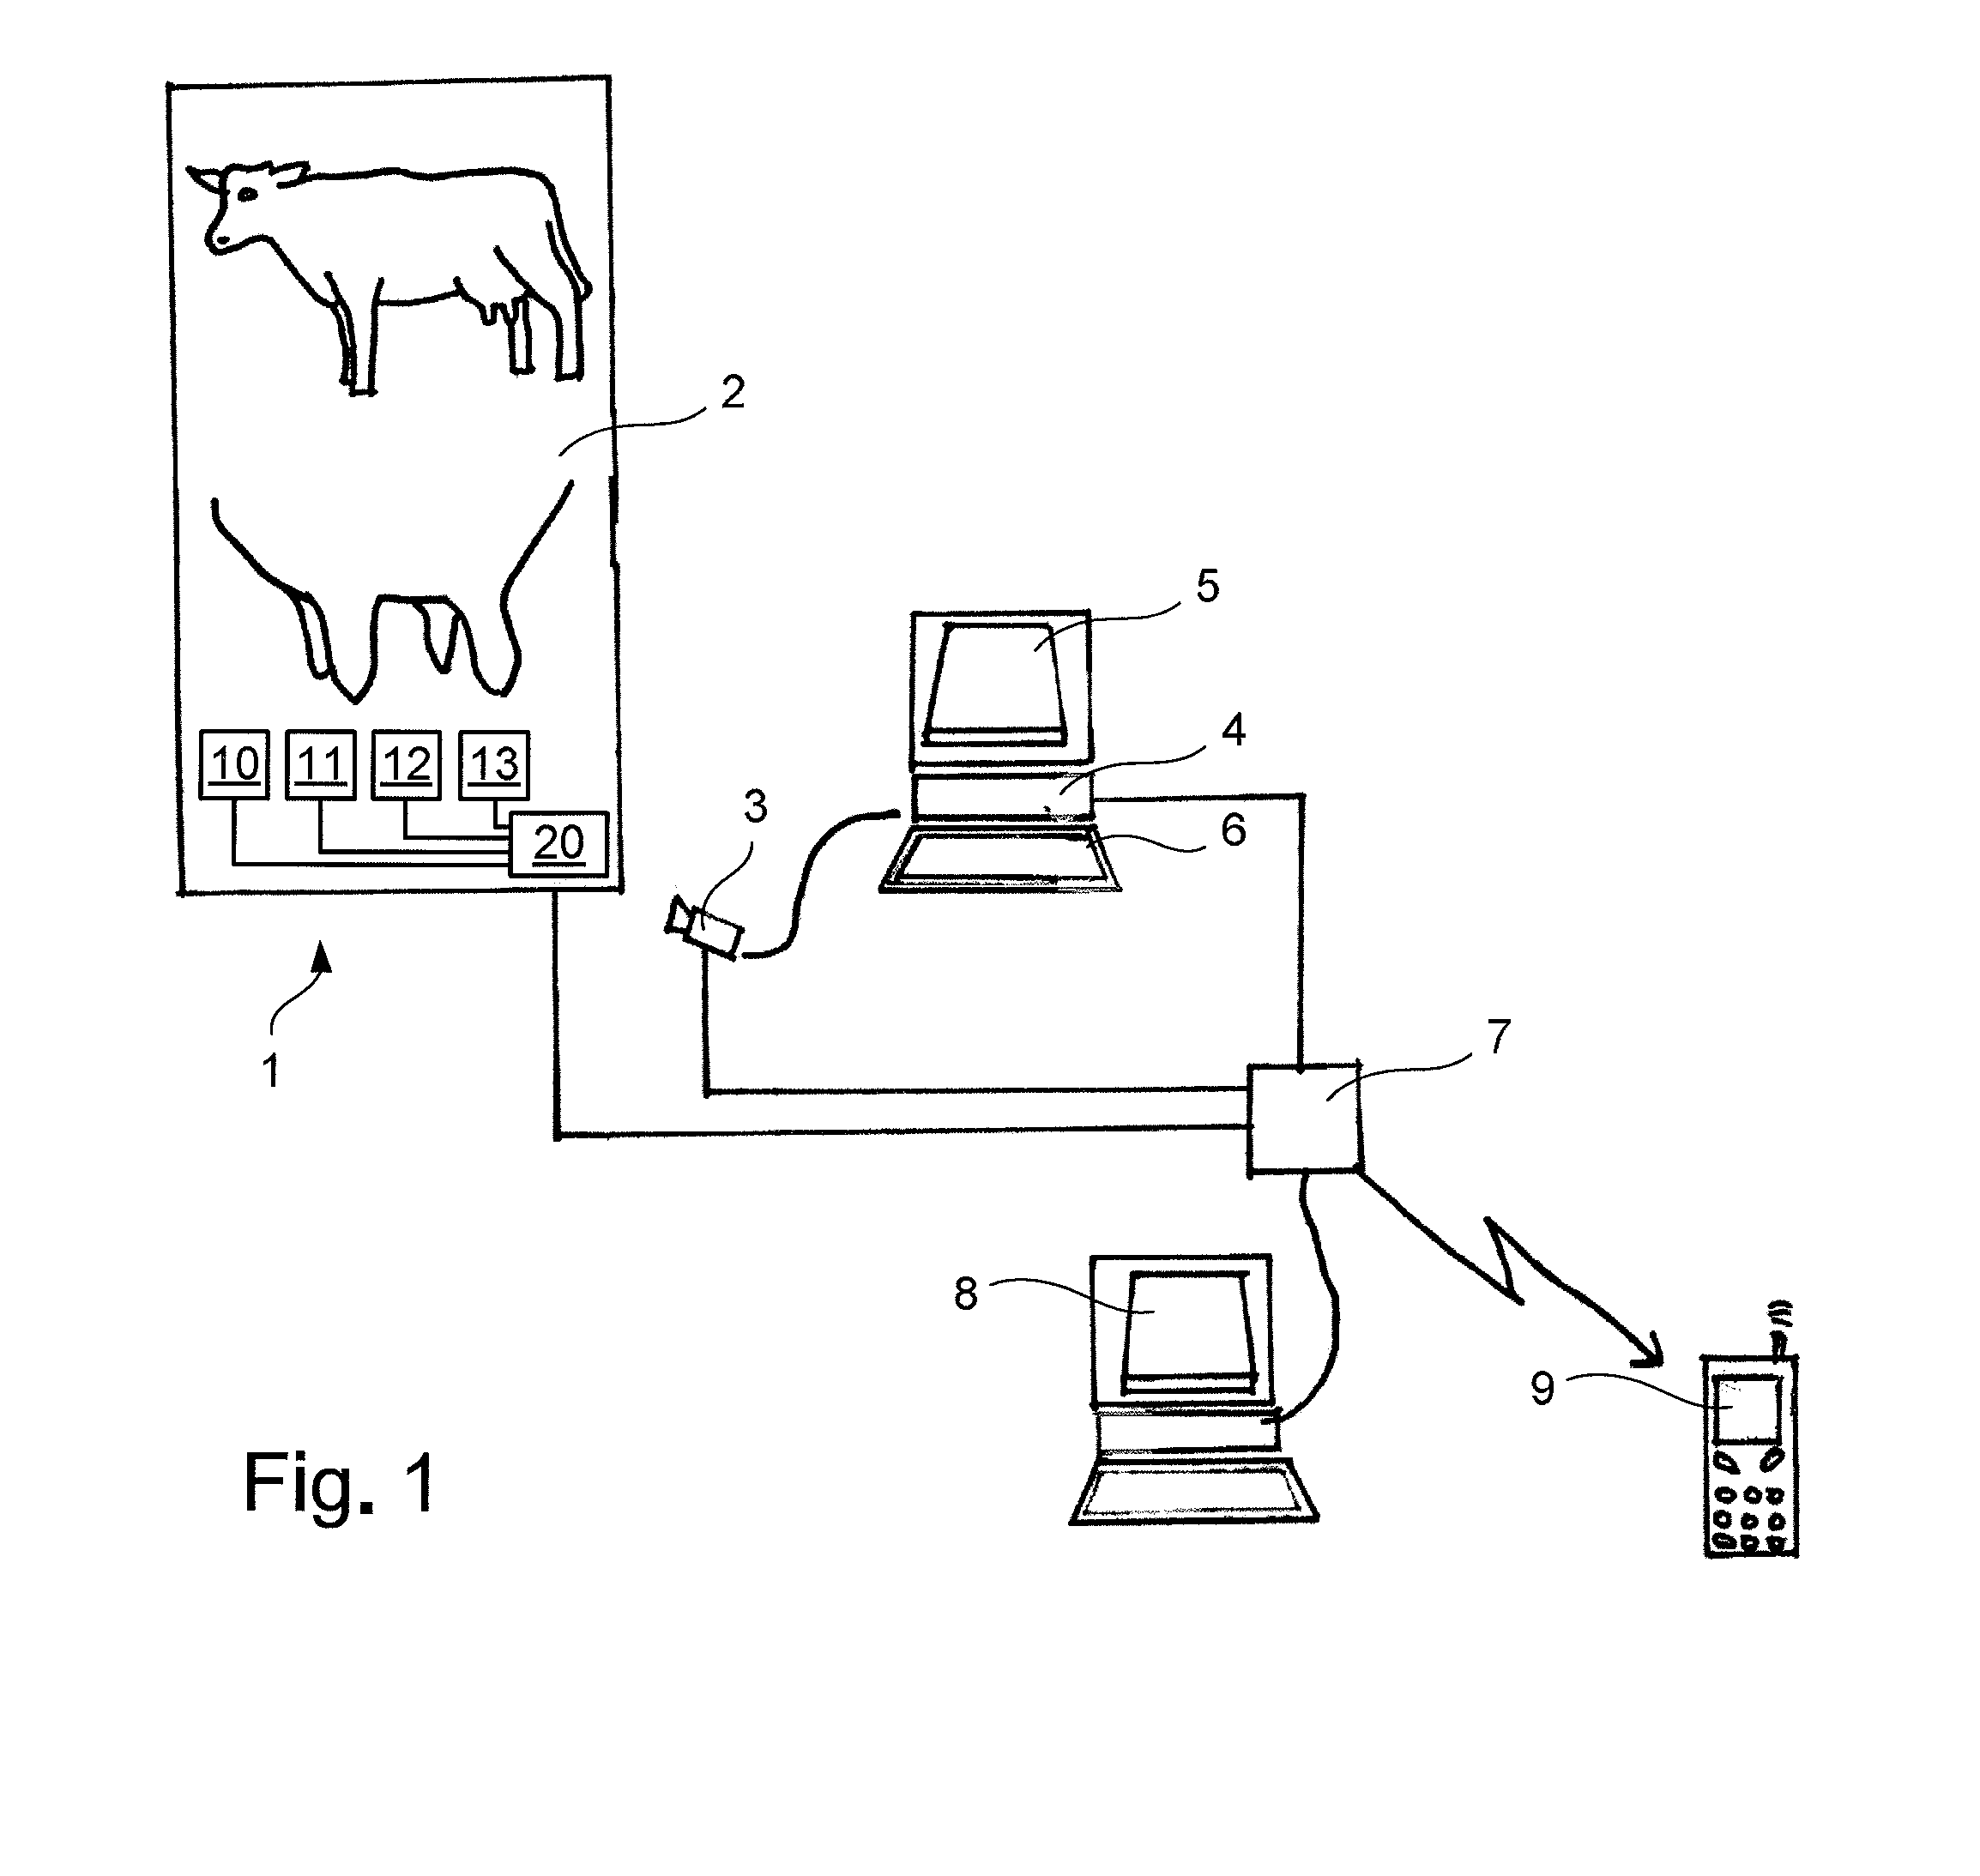 System and a Method for Controlling an Automatic Milking System